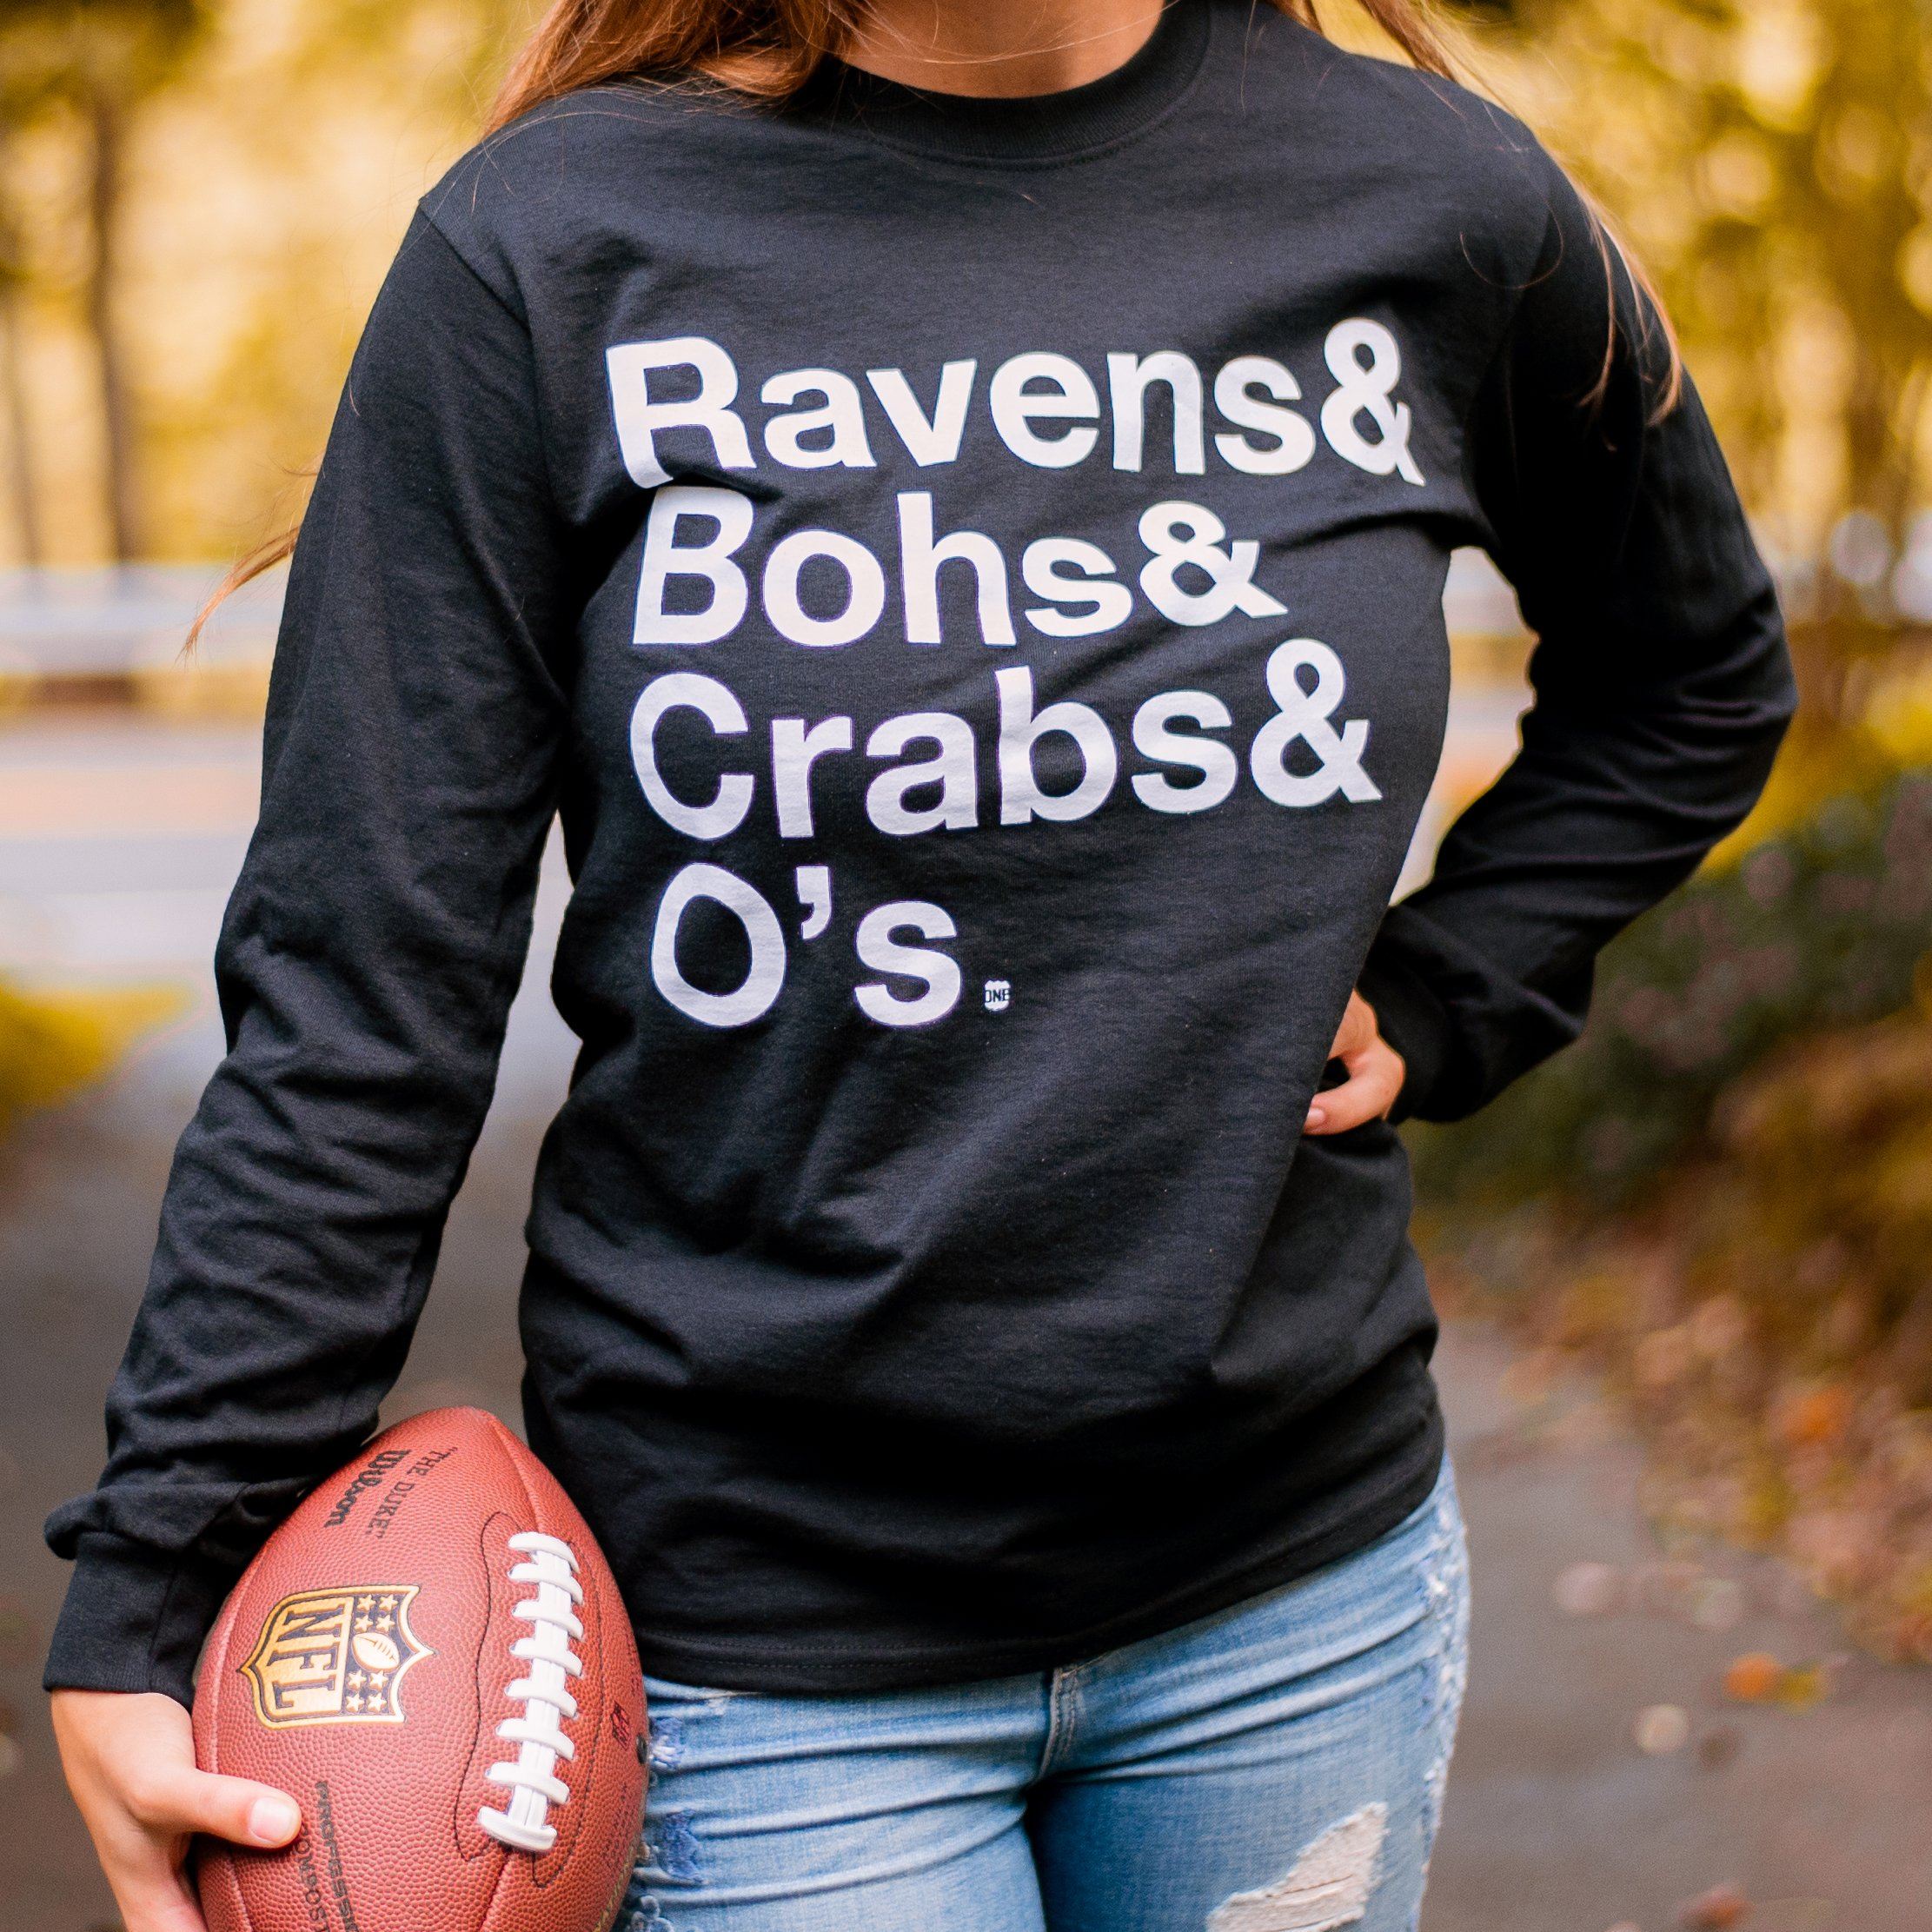 Ravens & Bohs & Crabs & O's Helvetica / Long Sleeve Shirt - Route One Apparel